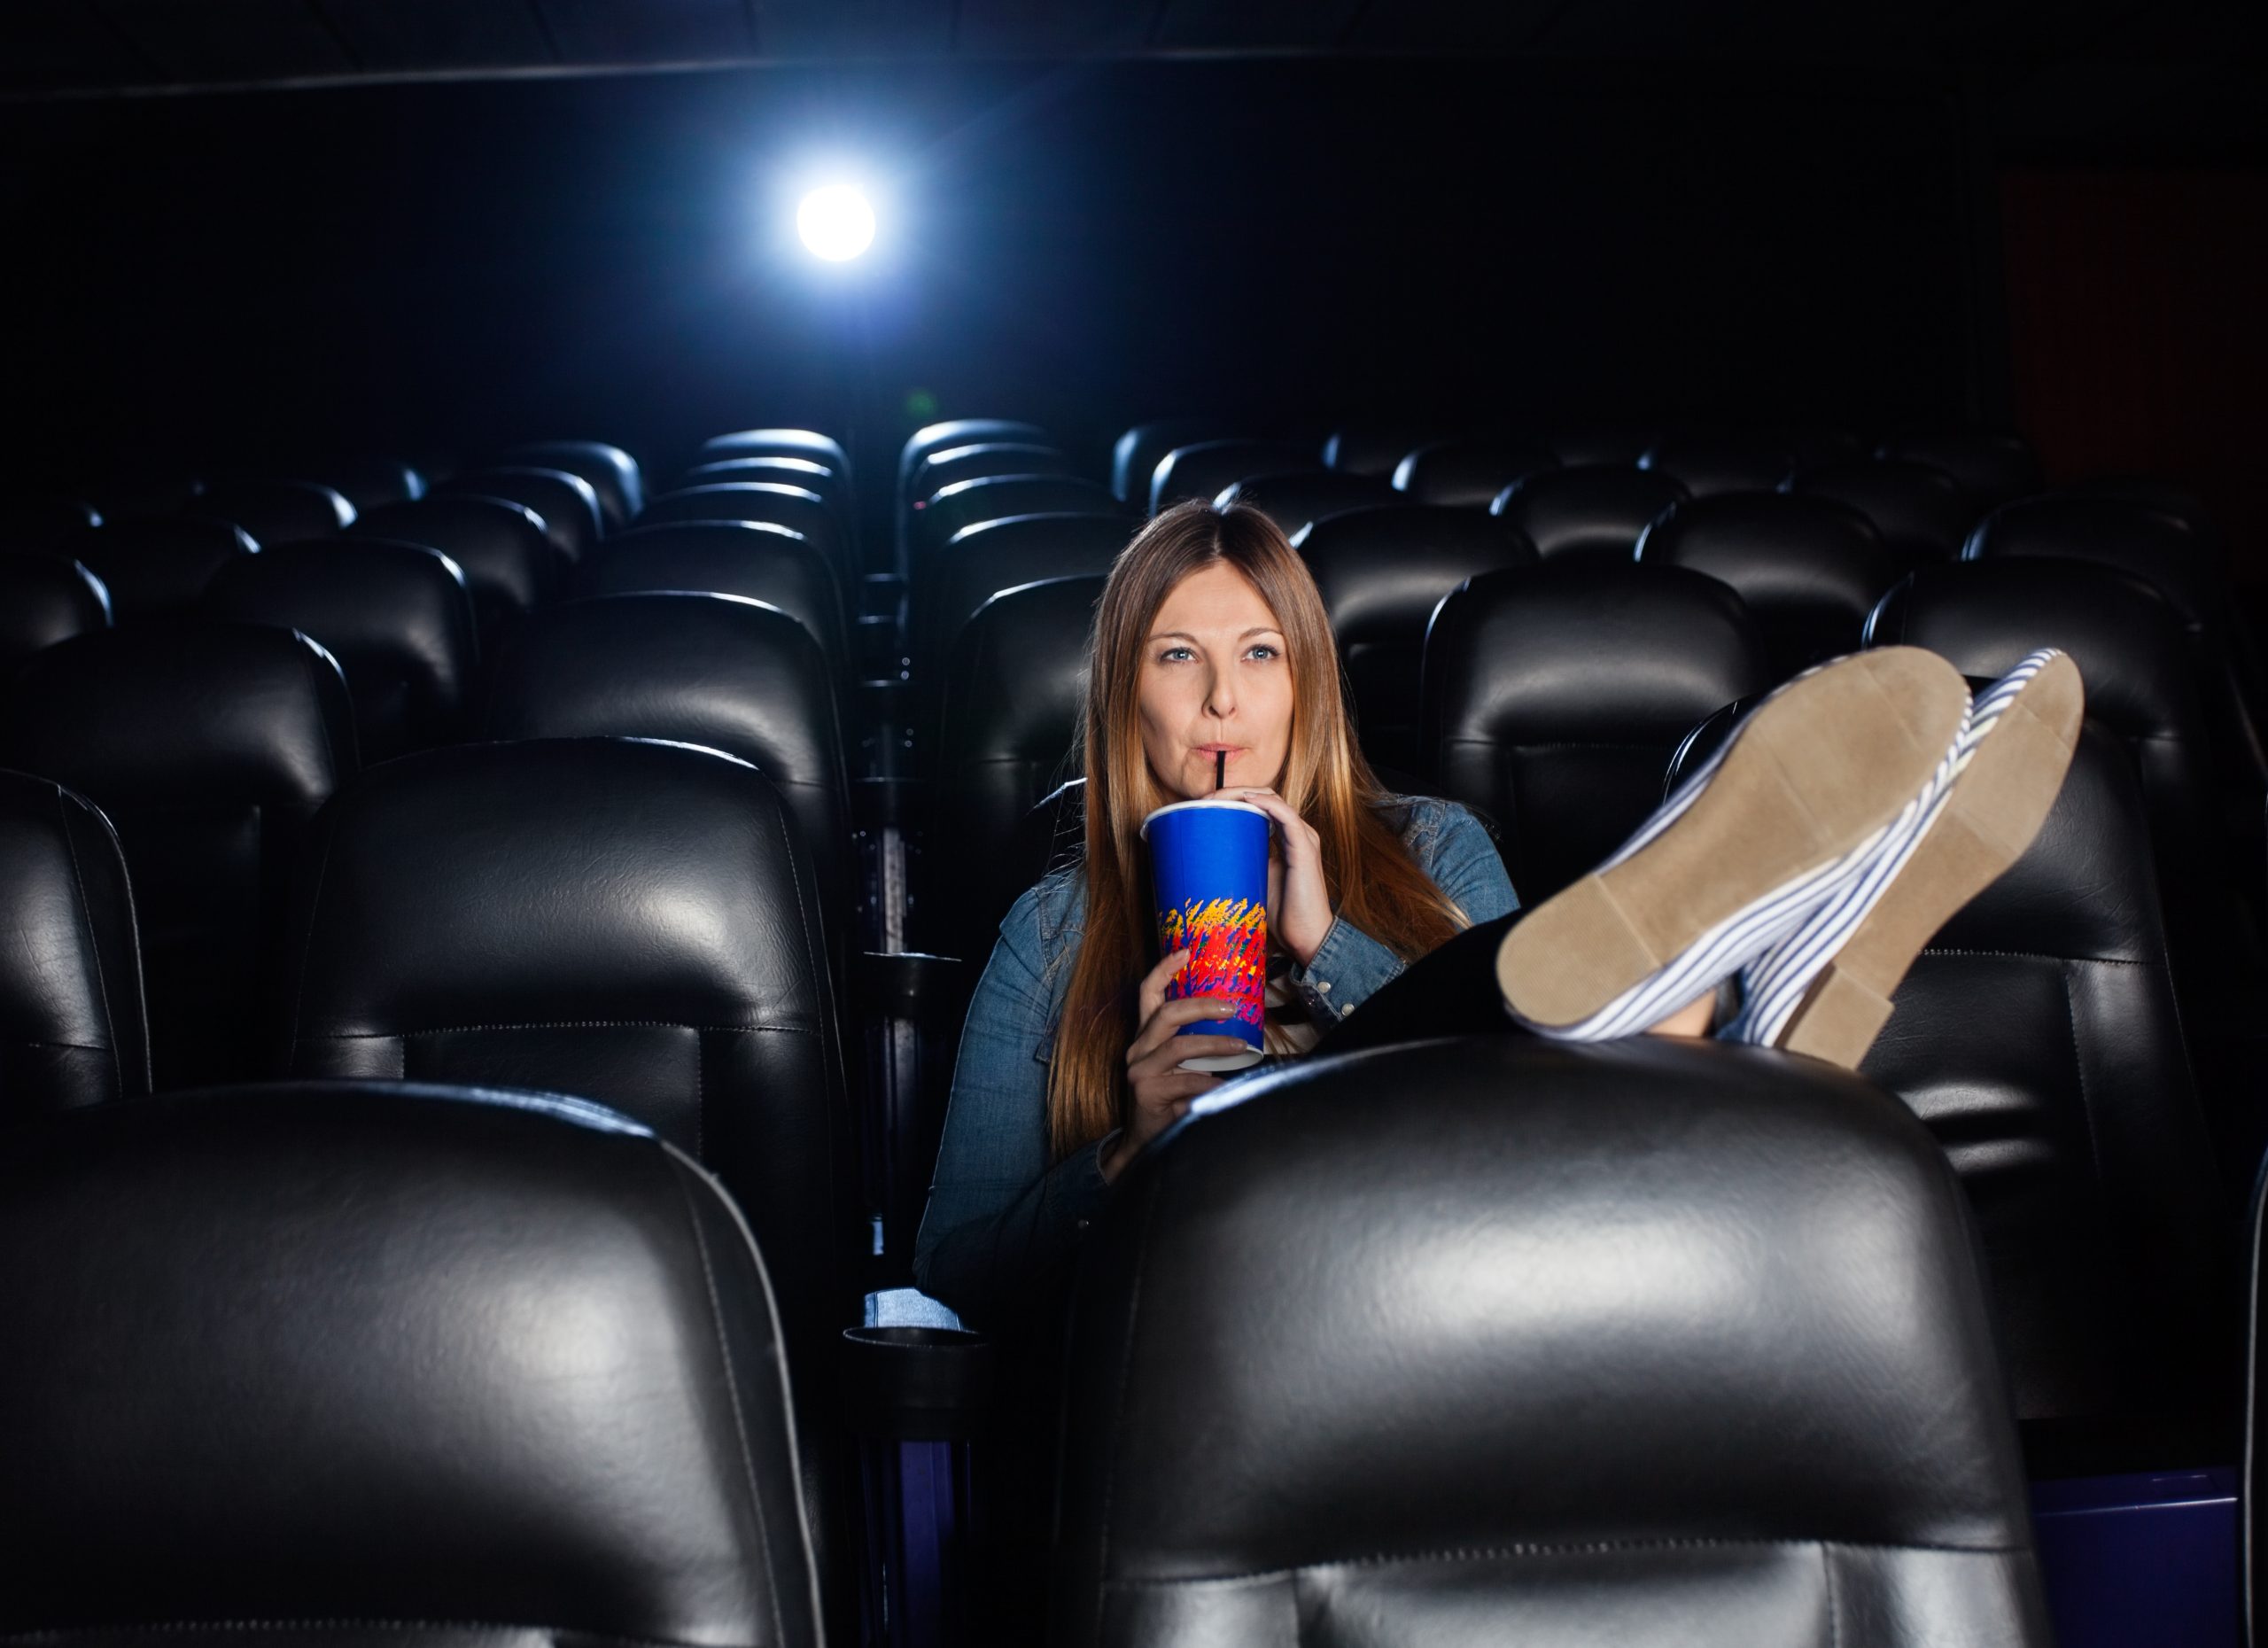 Are You a Badass Solo Moviegoer? – Going to the Movies Alone